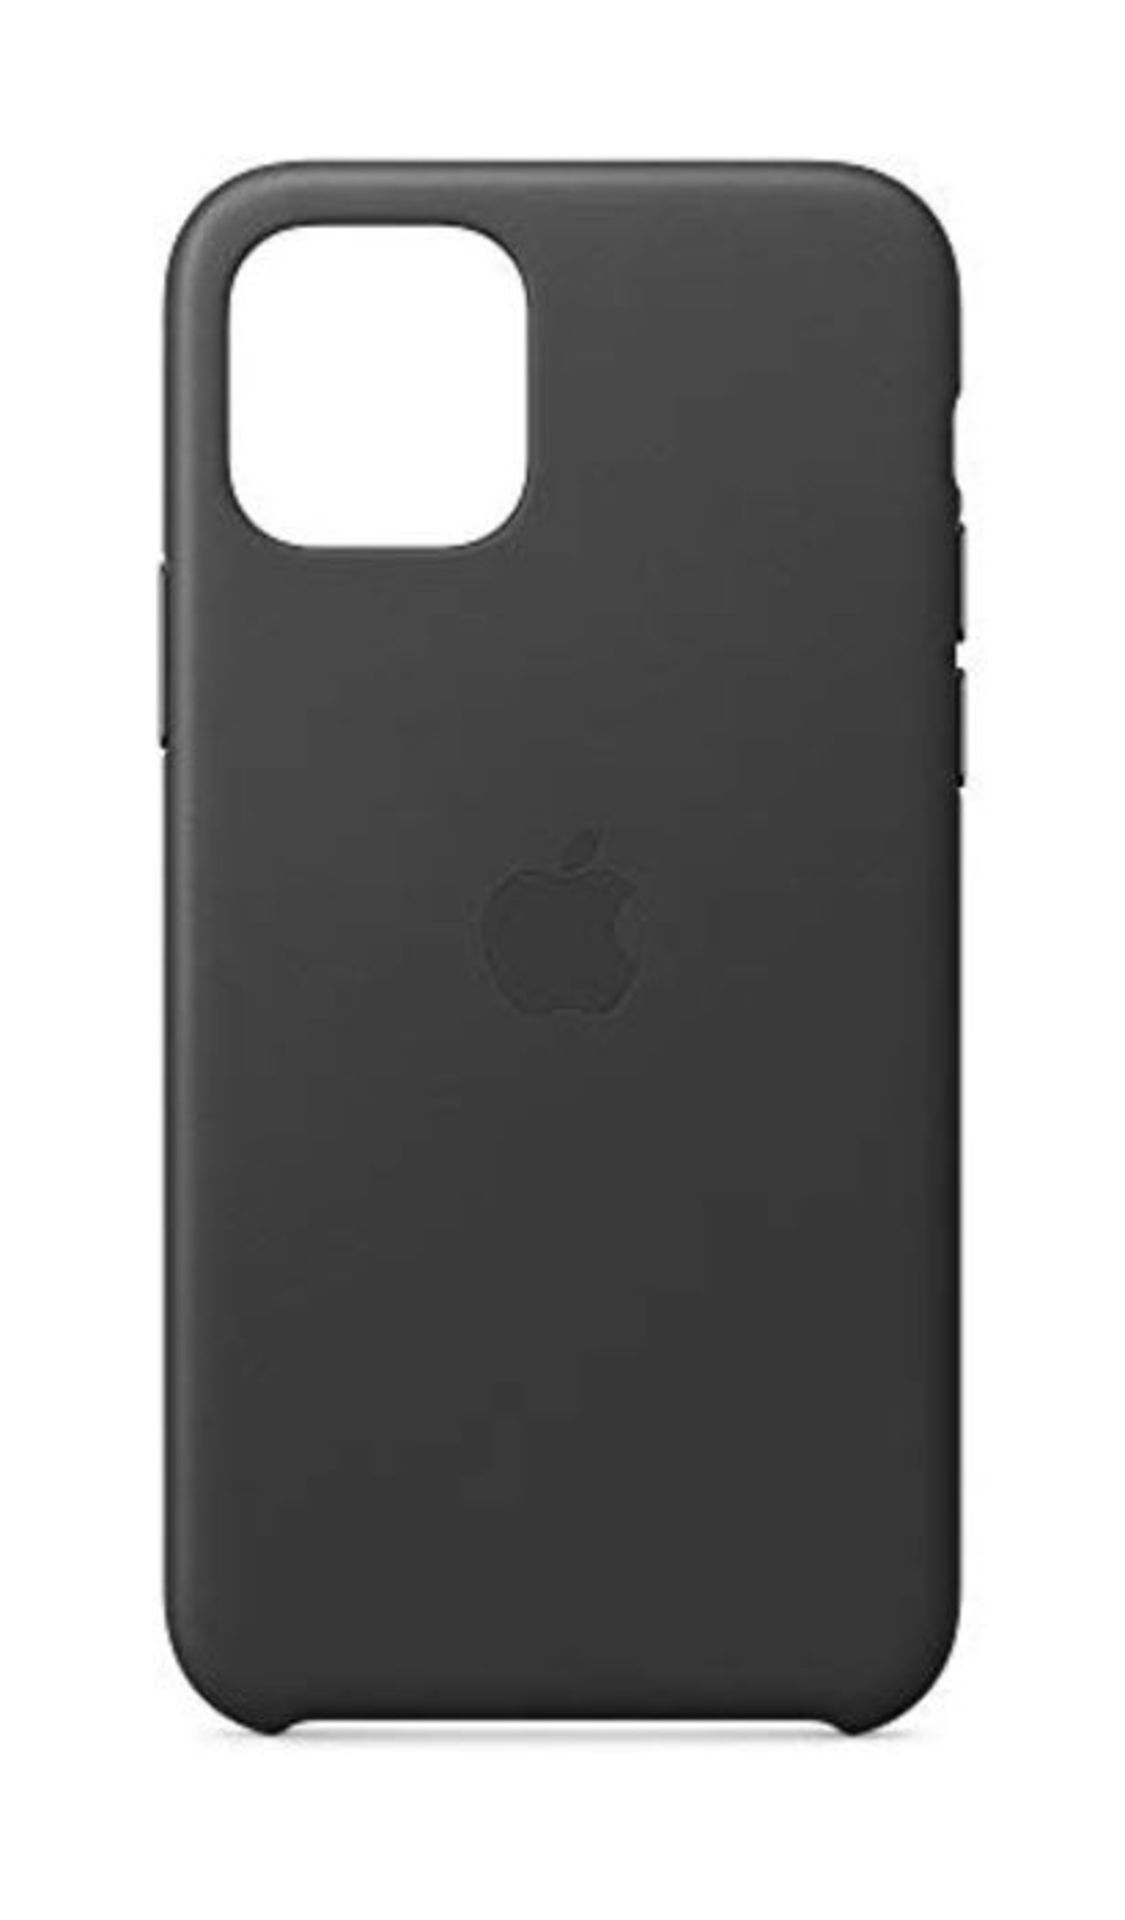 Apple Leather Case (for iPhone 11 Pro) - Black